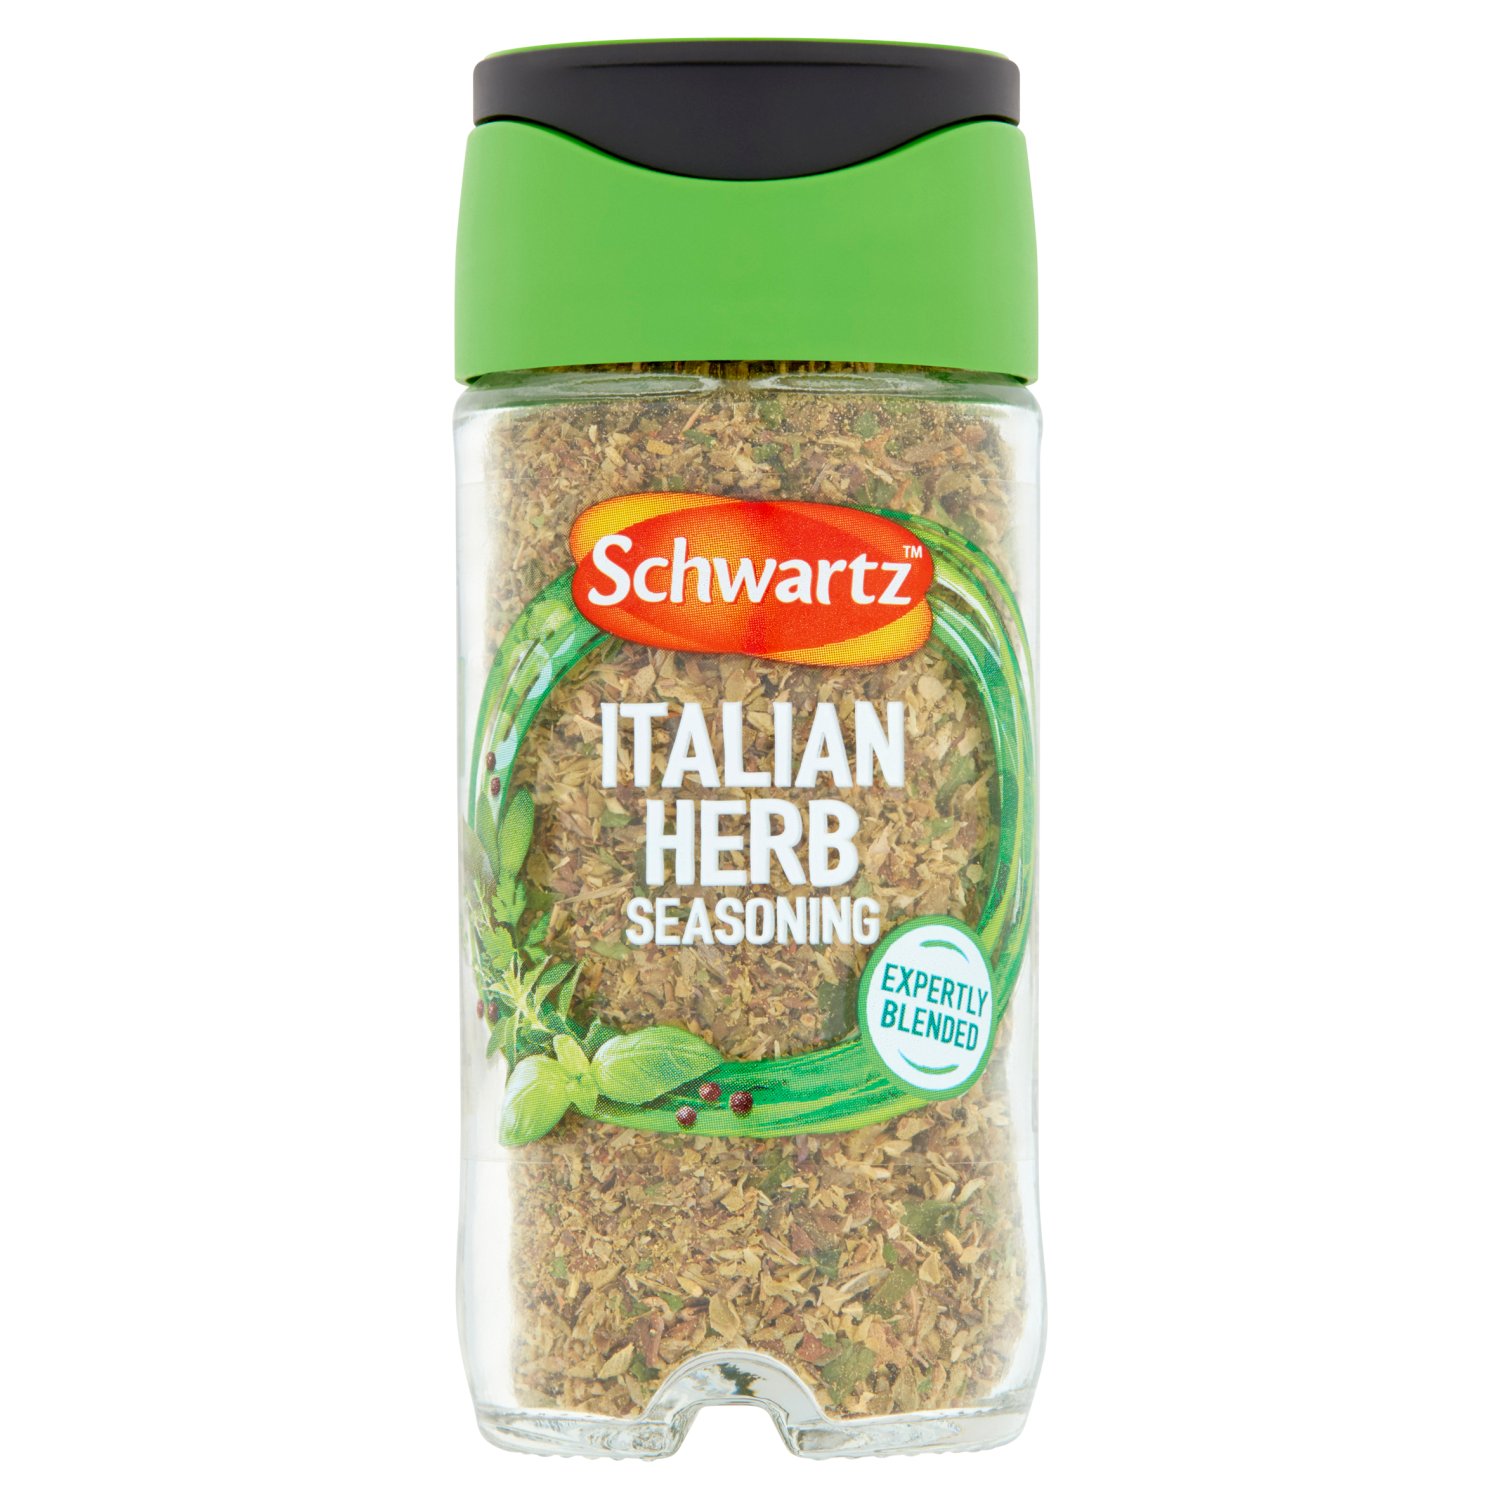 Picked with care. Packed with flavour.

Schwartz Italian Herb Seasoning will take your tastebuds on a culinary adventure you'll never forget.

Bring a little taste of the Mediterranean to the comfort of your home with a premium blend of oregano, thyme, basil parsley, sage, bay leaves and black pepper.

The perfect match for tomato-based sauces, Bolognese, and other pasta dishes. Also goes great with roasted vegetables, oven-baked fish, omelettes and pizzas.

Schwartz Italian Herb Seasoning are Picked with care. Packed with flavour.
Our sustainable process begins right at the source

Schwartz work directly with local farmers across over 40 countries to ensure our ingredients are of the highest quality. Carefully selecting the best spots to grow our herbs and spices around the world allows us to guarantee intense flavours, vibrant colours and powerful aromas.

We don't rush the process
We wait for the right time when our ingredients are at their peak flavour. We then choose the best crop and carefully harvest, dry and pack each herb and spice.

The result?
Seasonings that are bursting with incredible flavour for tasty, home-cooked meals in no time.